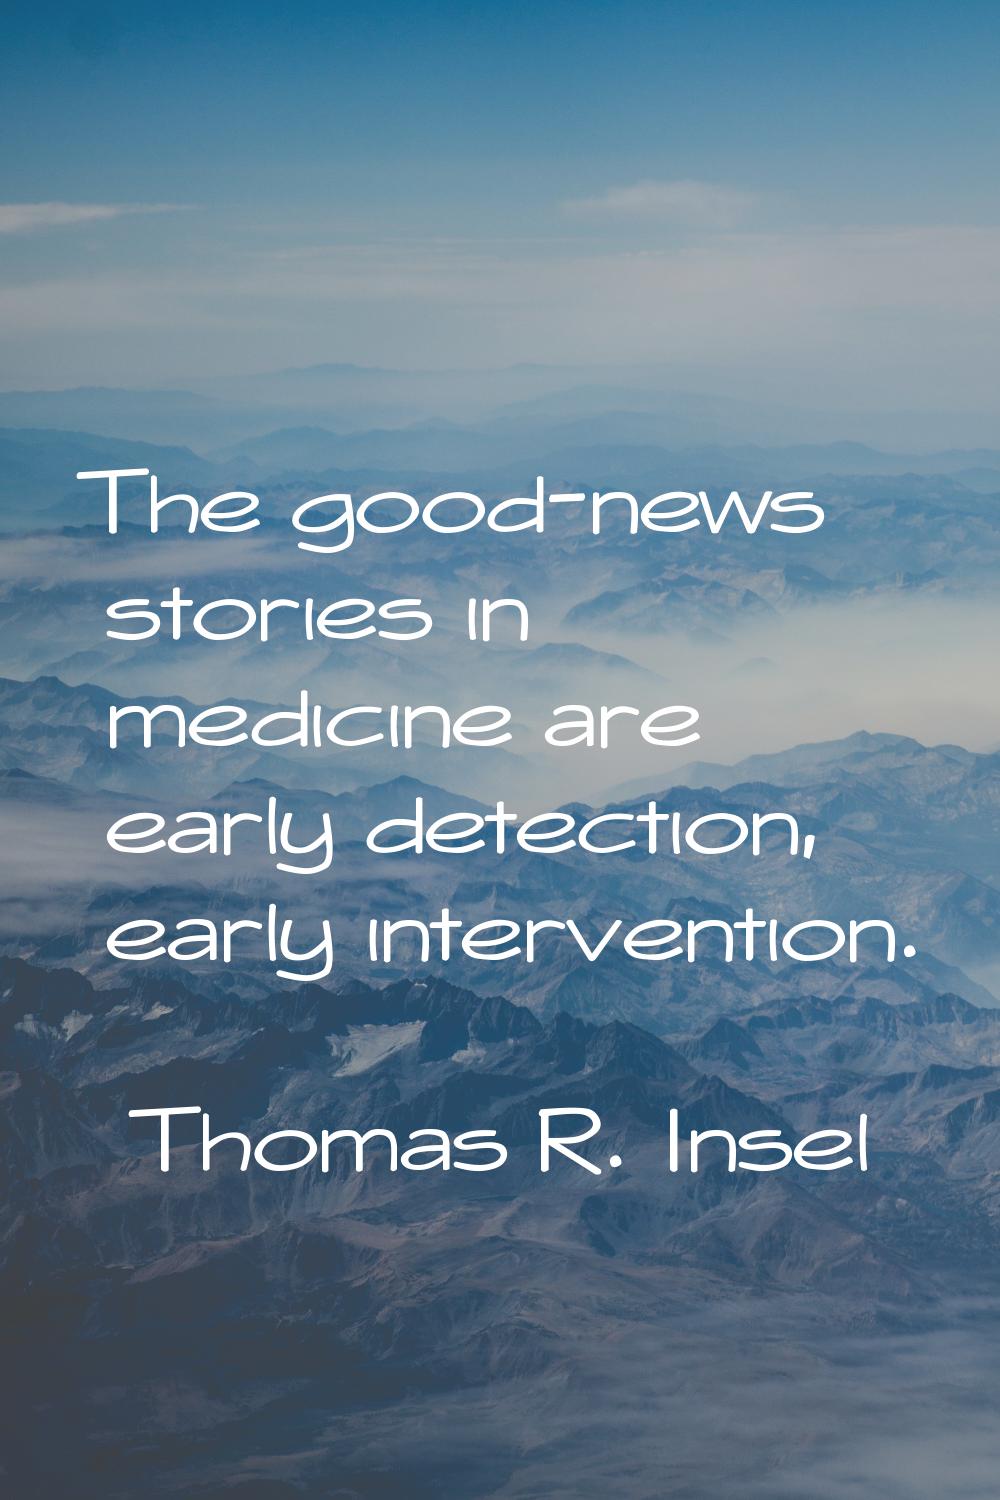 The good-news stories in medicine are early detection, early intervention.